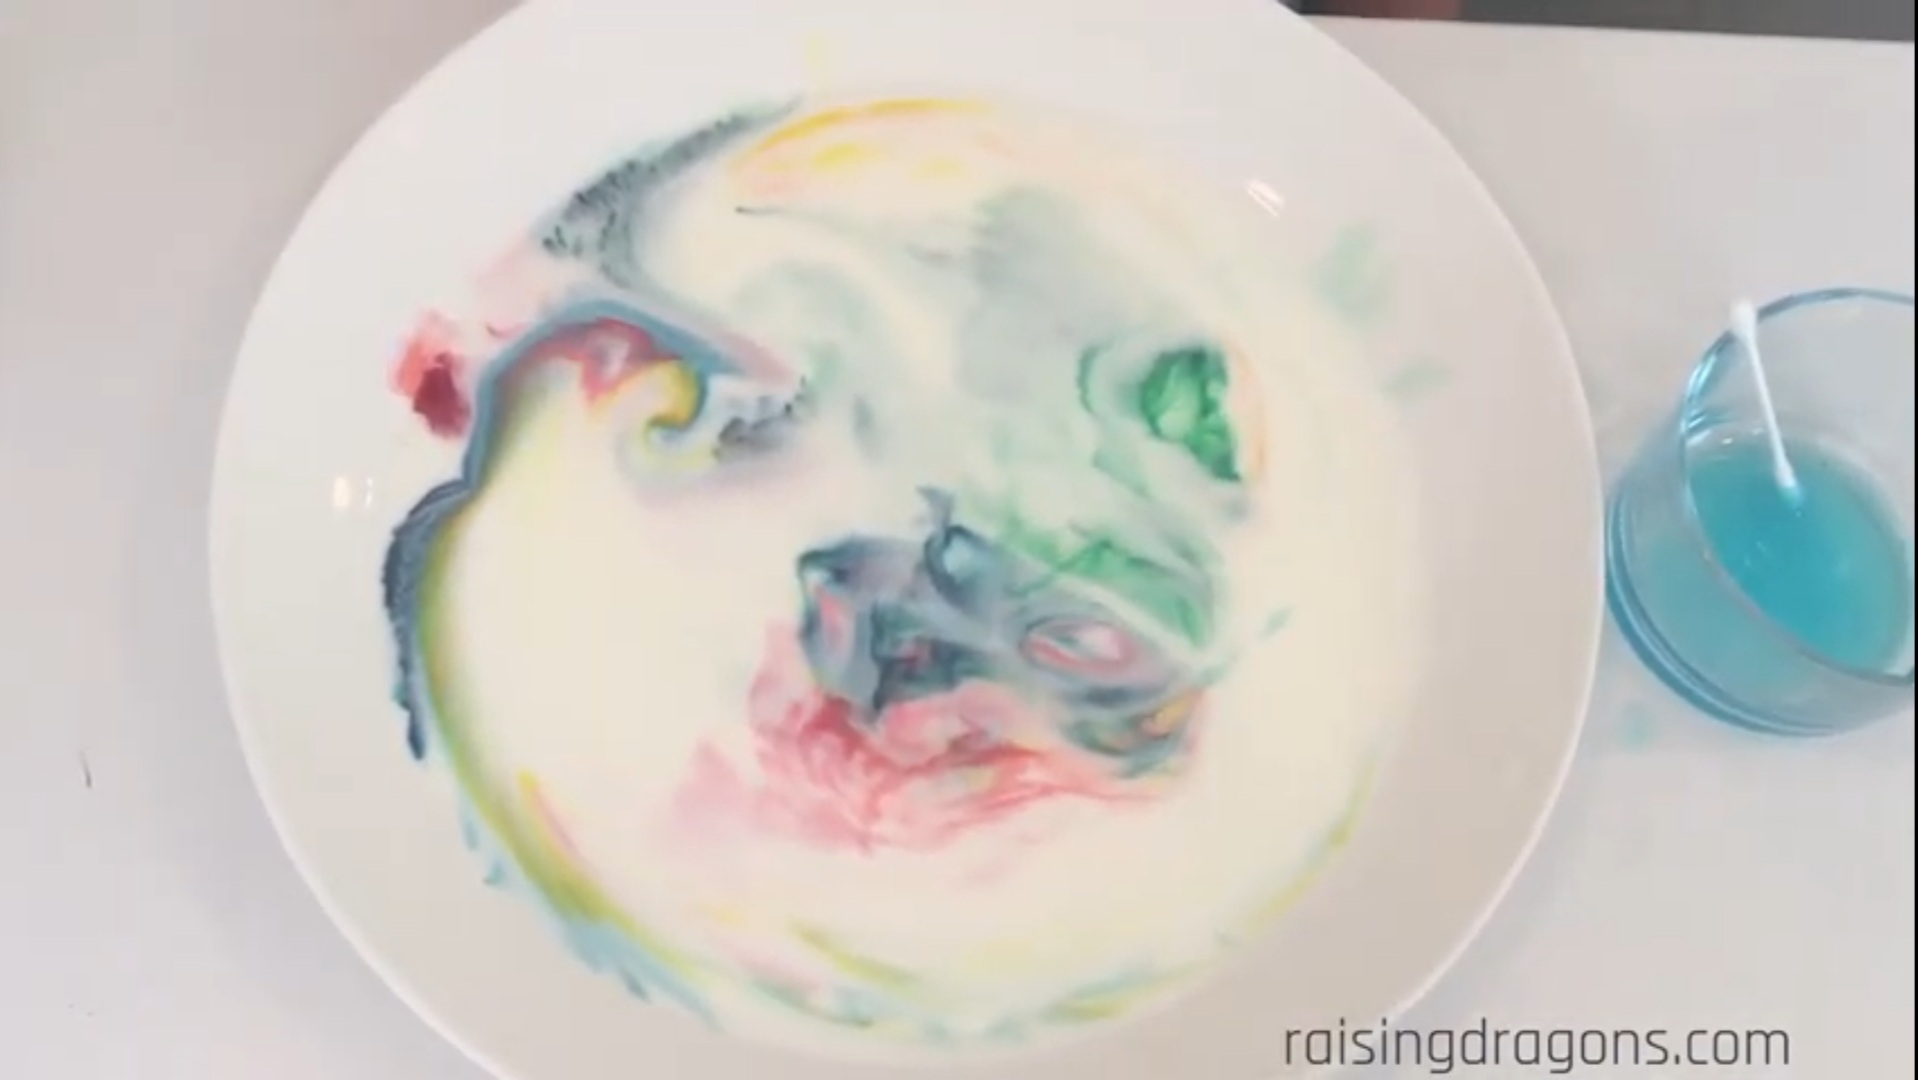 5 Fun & Cool Science Activities with Dye to Do With the Kids 6